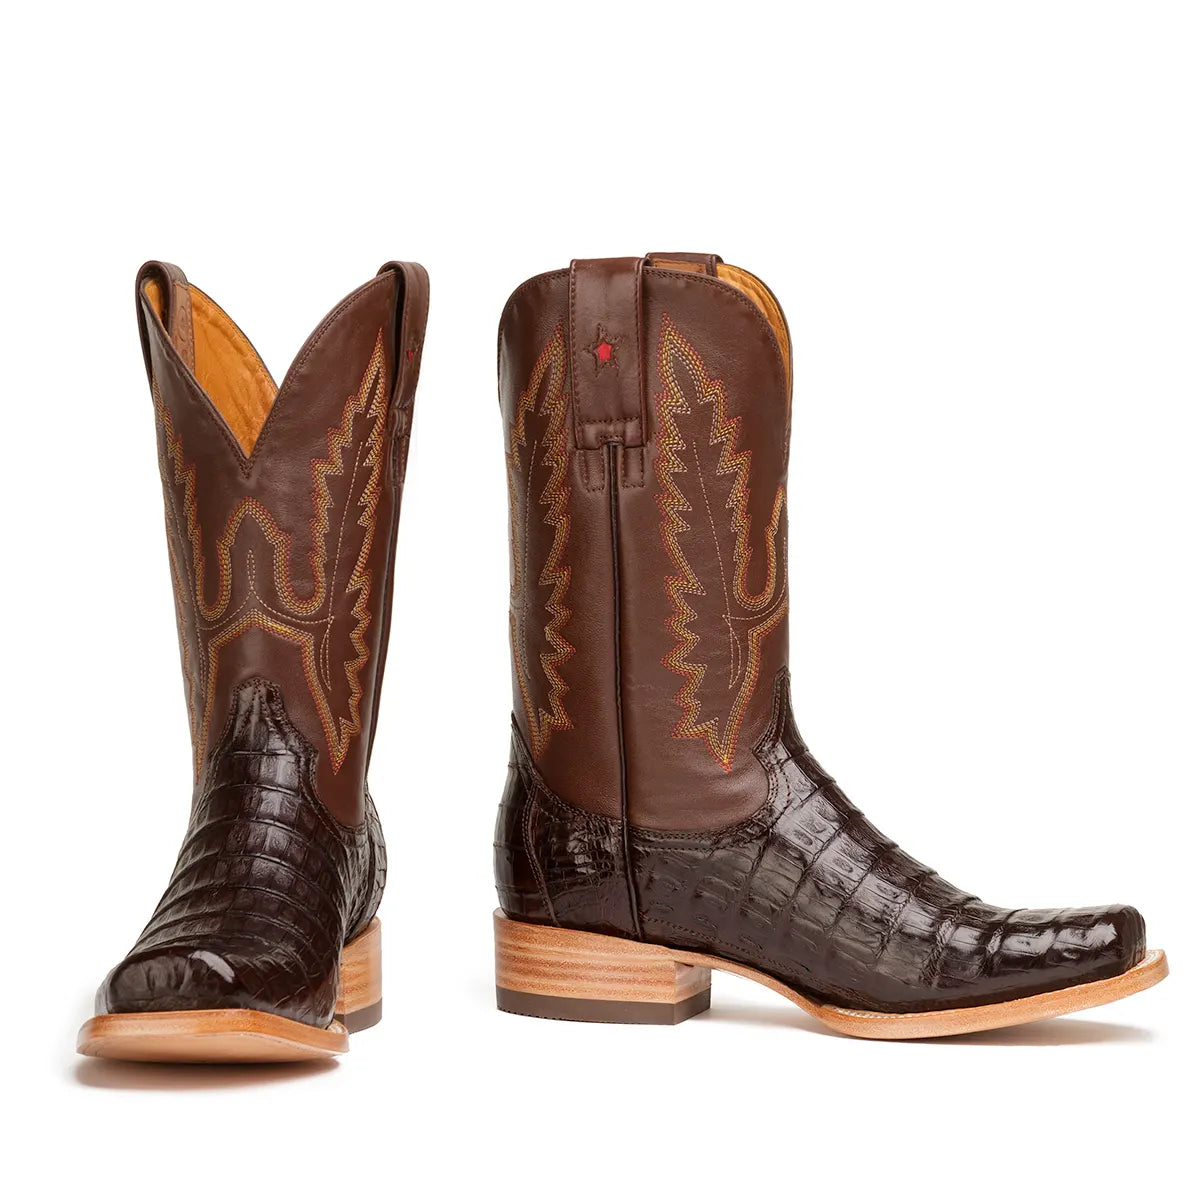 Garner Caiman Tail Belly Cut Stockman Square Toe Boot - Brown